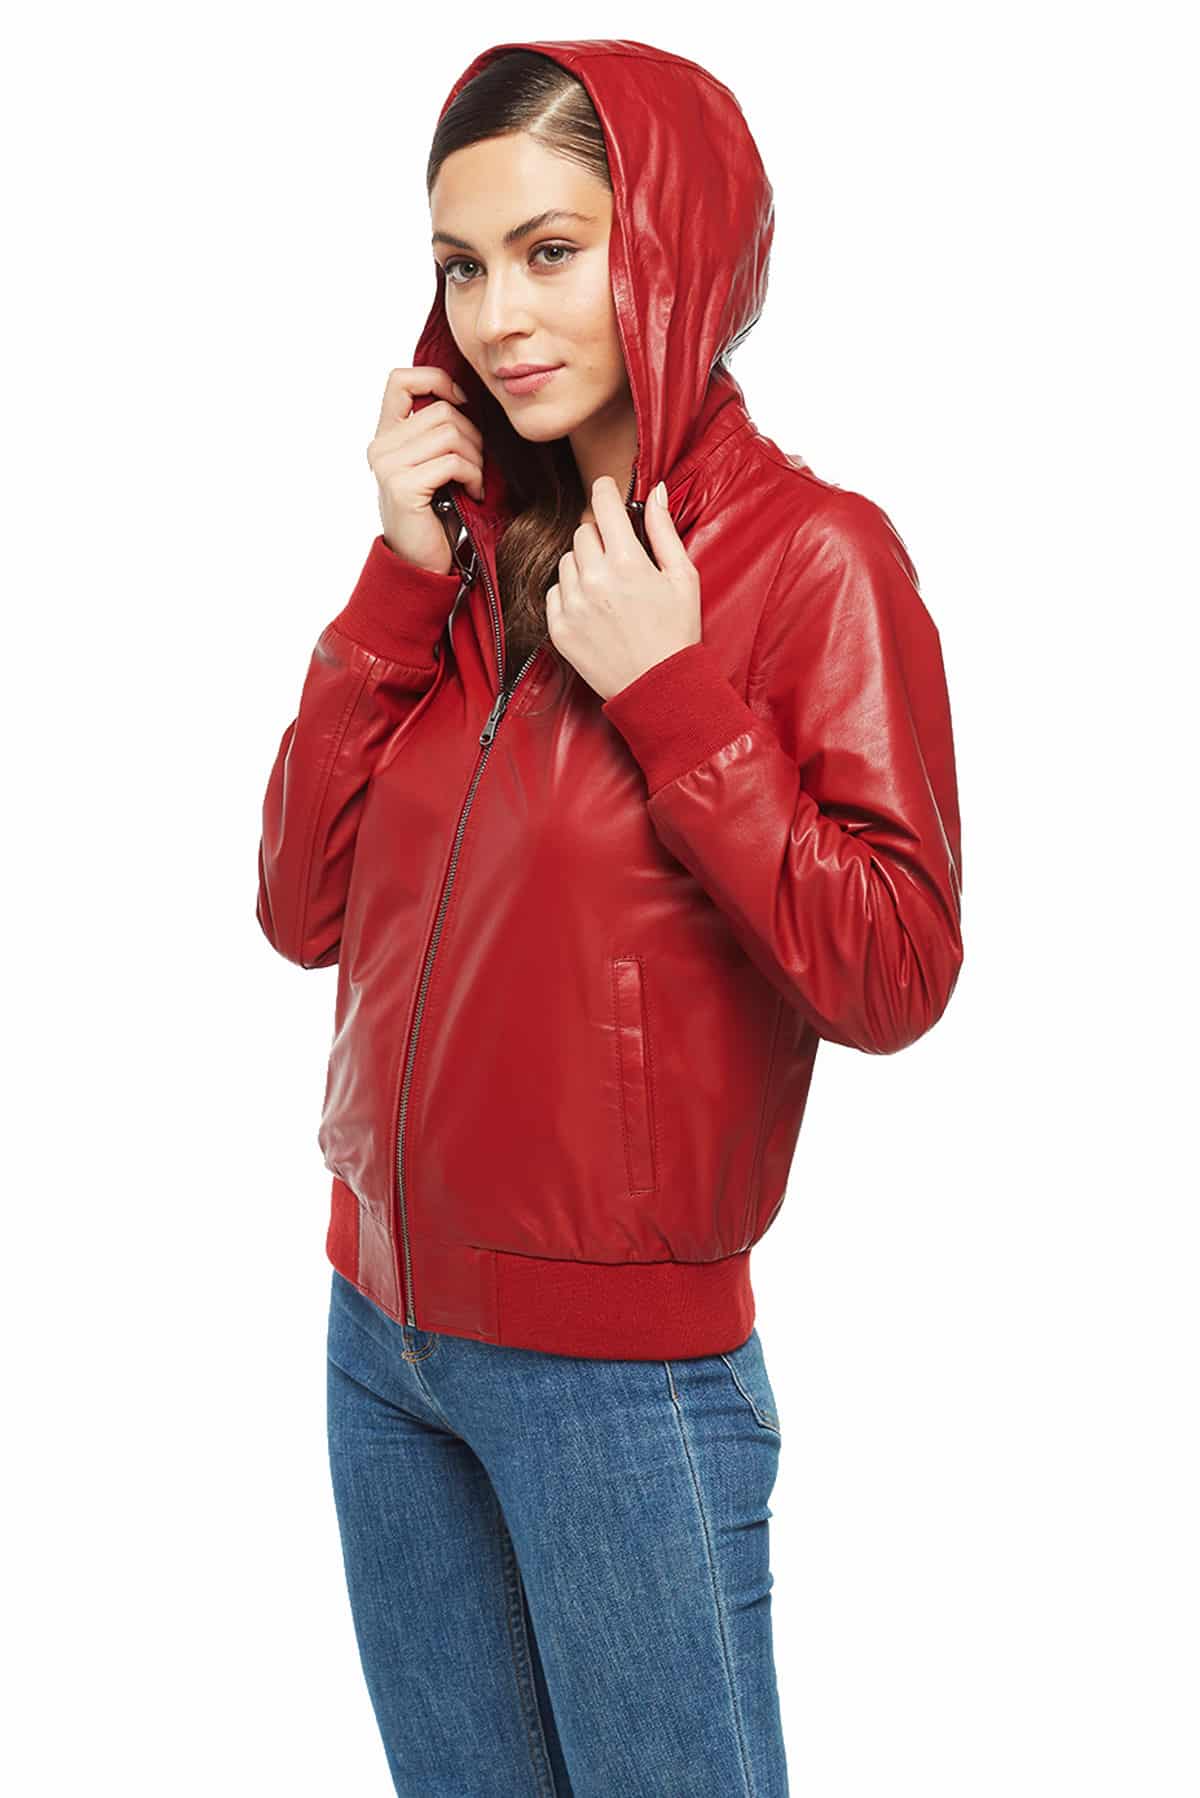 Reversible Hooded Red Bomber Jacket – Double Sided Jacket